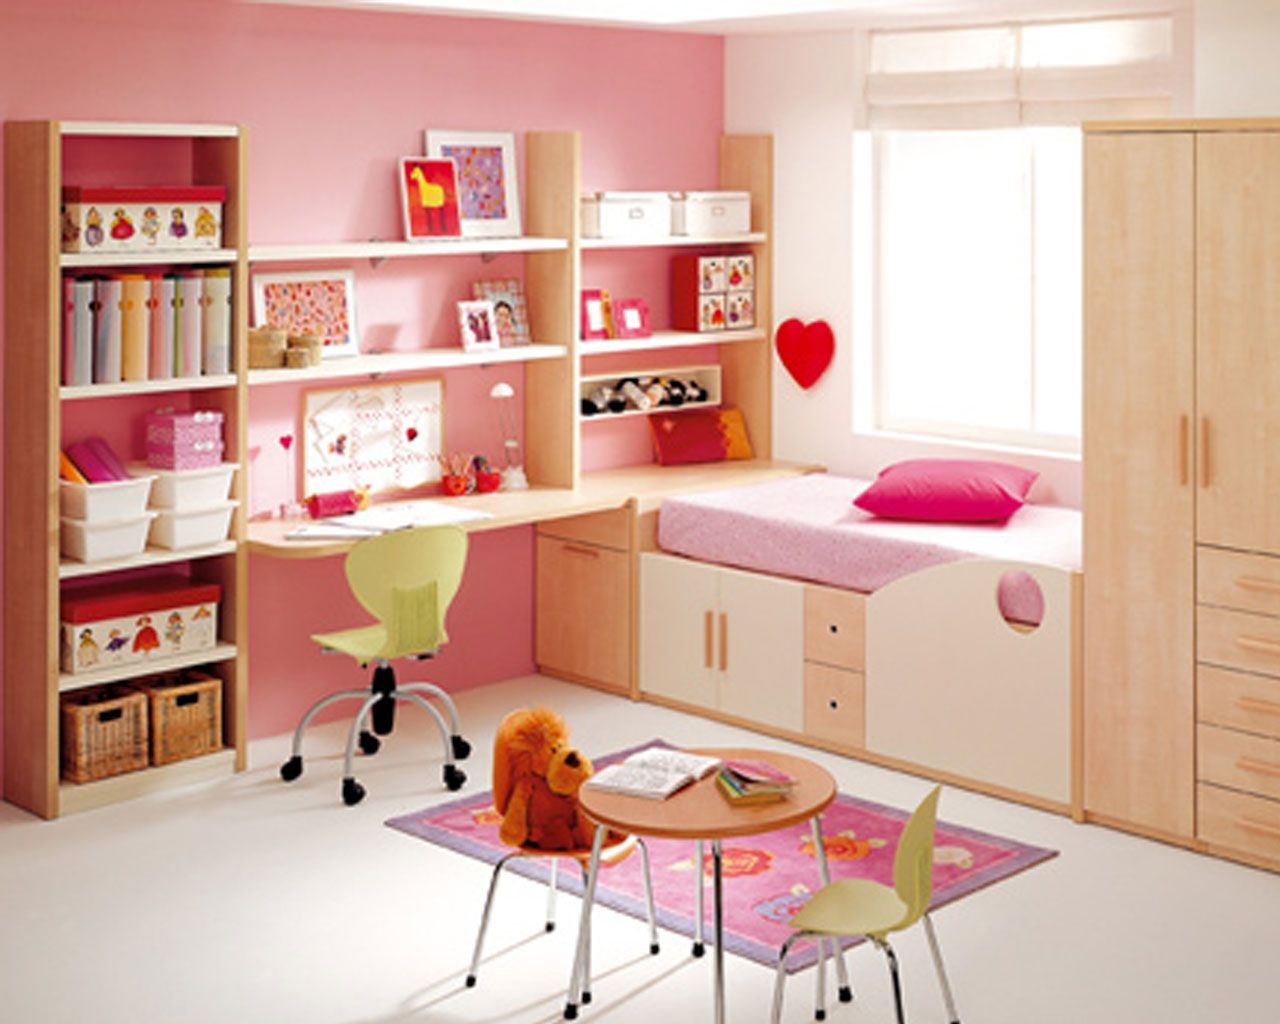 Pink Playful Paint Colors for Small Bedrooms